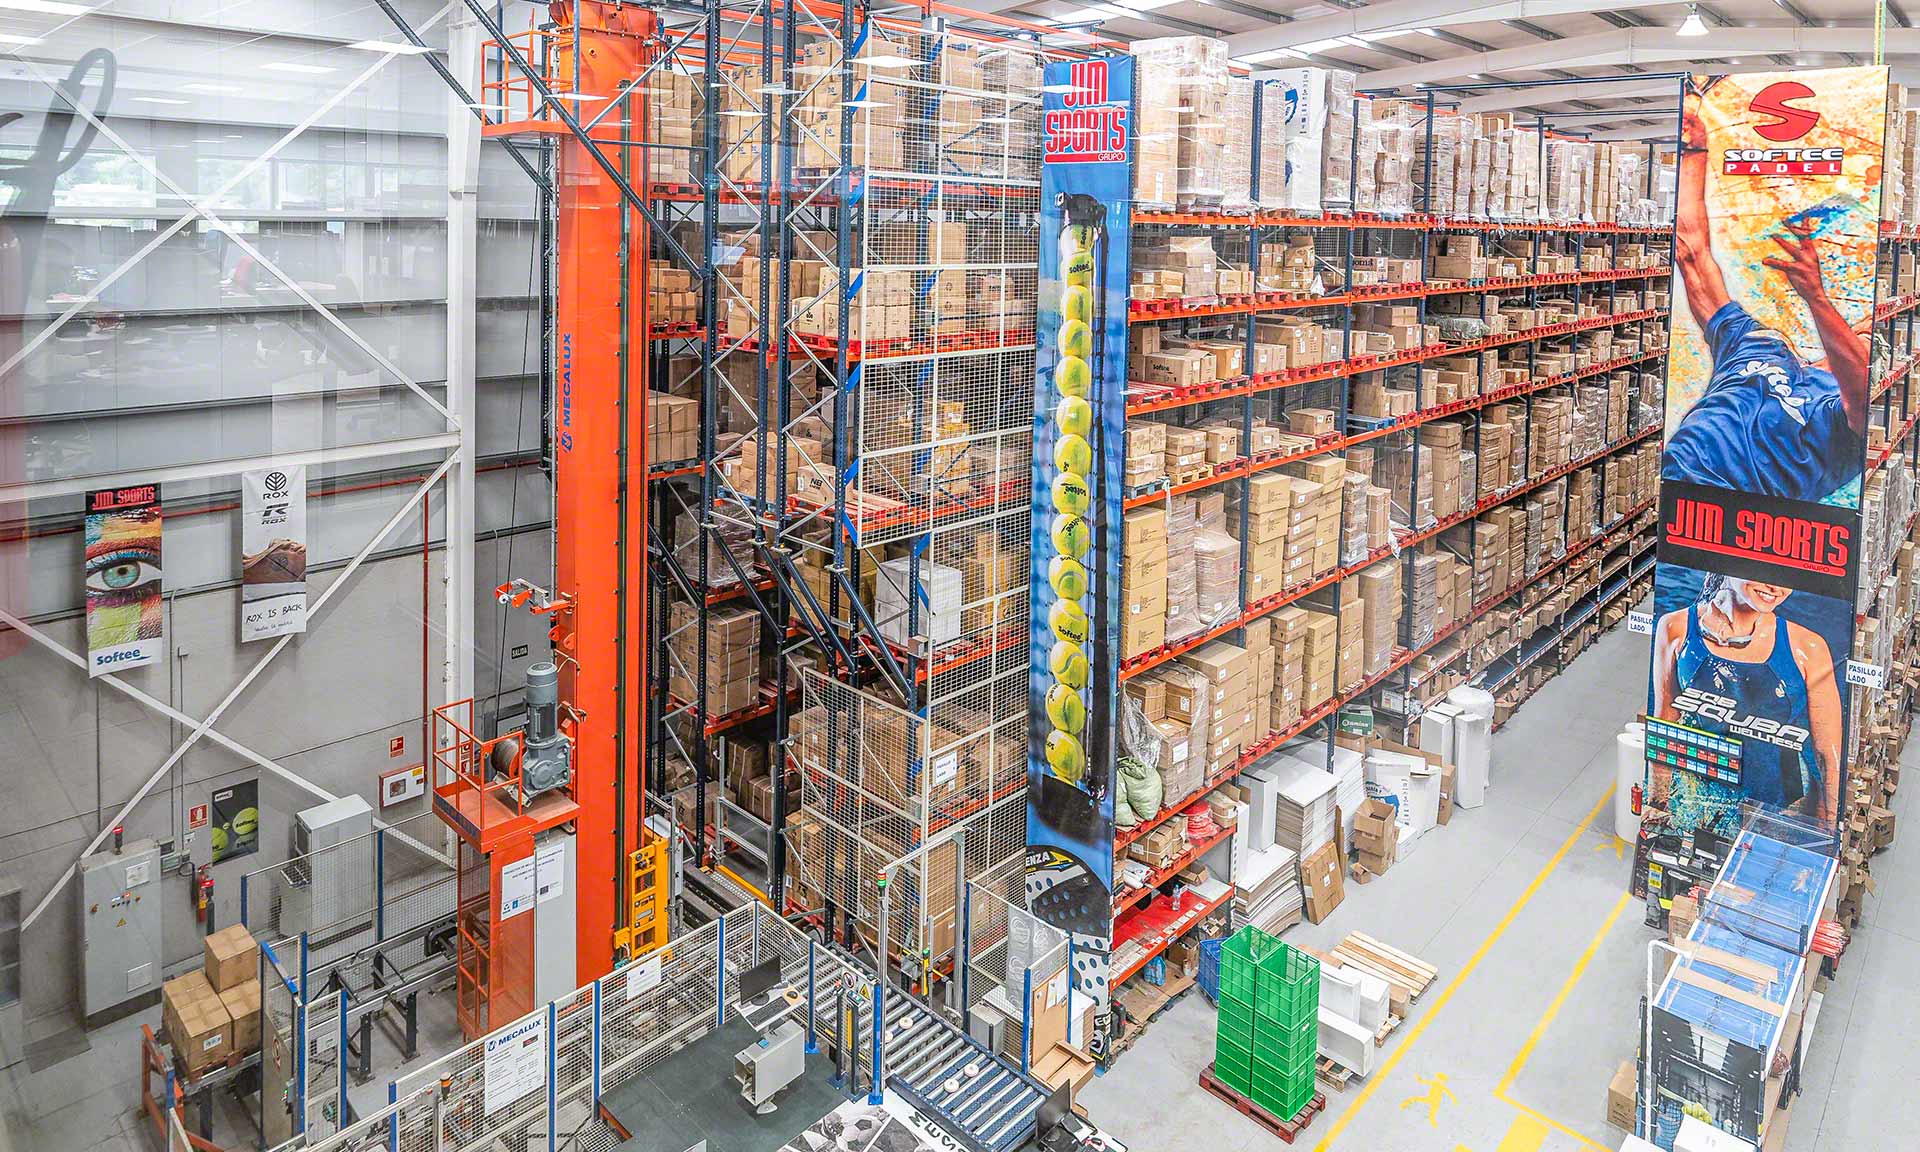 Jim Sports automates and digitalises its sporting goods warehouse in Palas de Rei, Spain